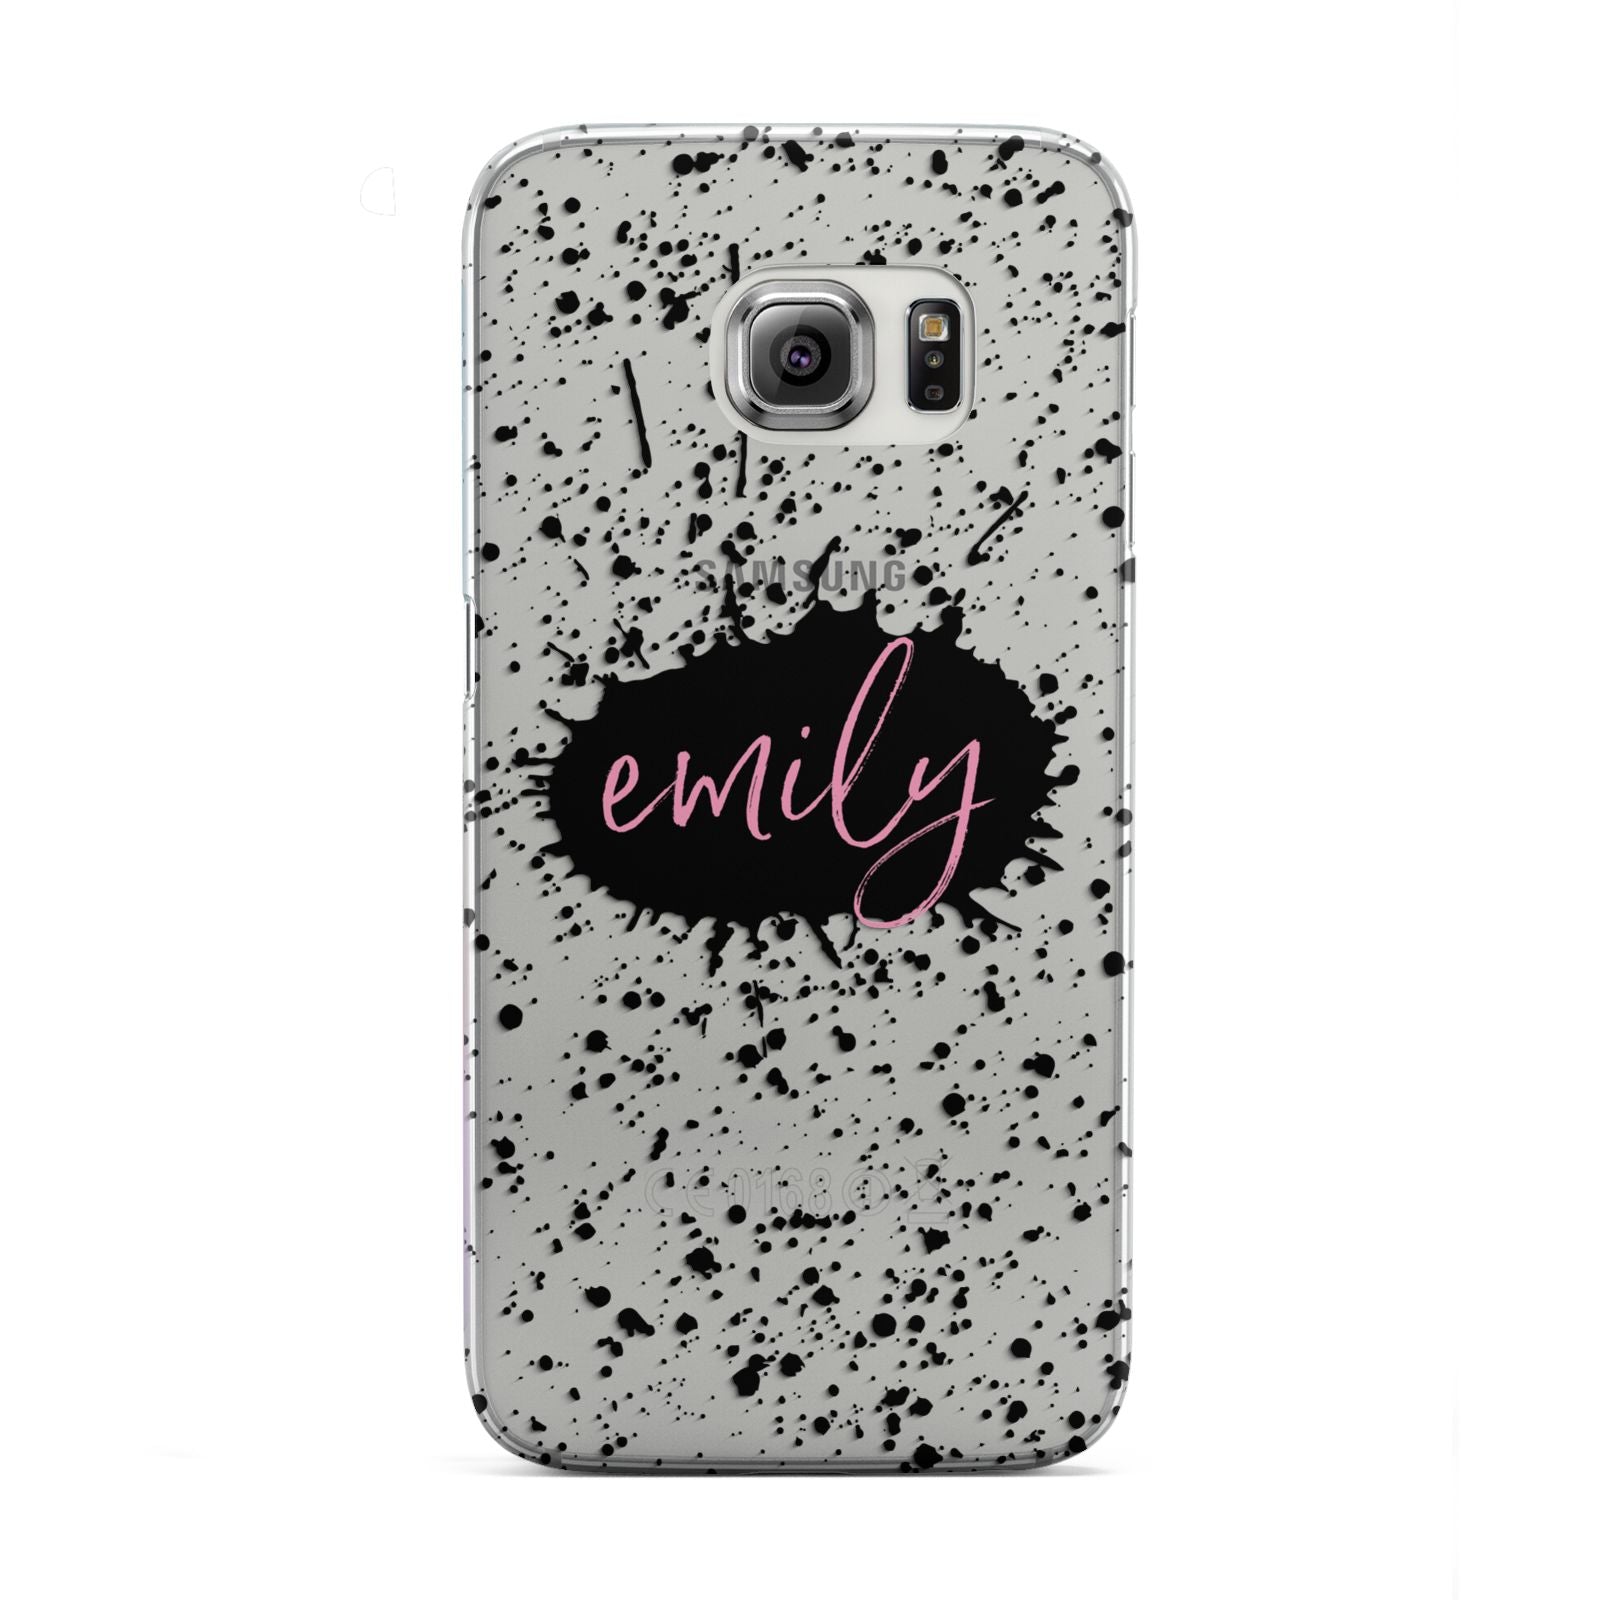 Personalised Black Ink Splat Clear Name Samsung Galaxy S6 Edge Case